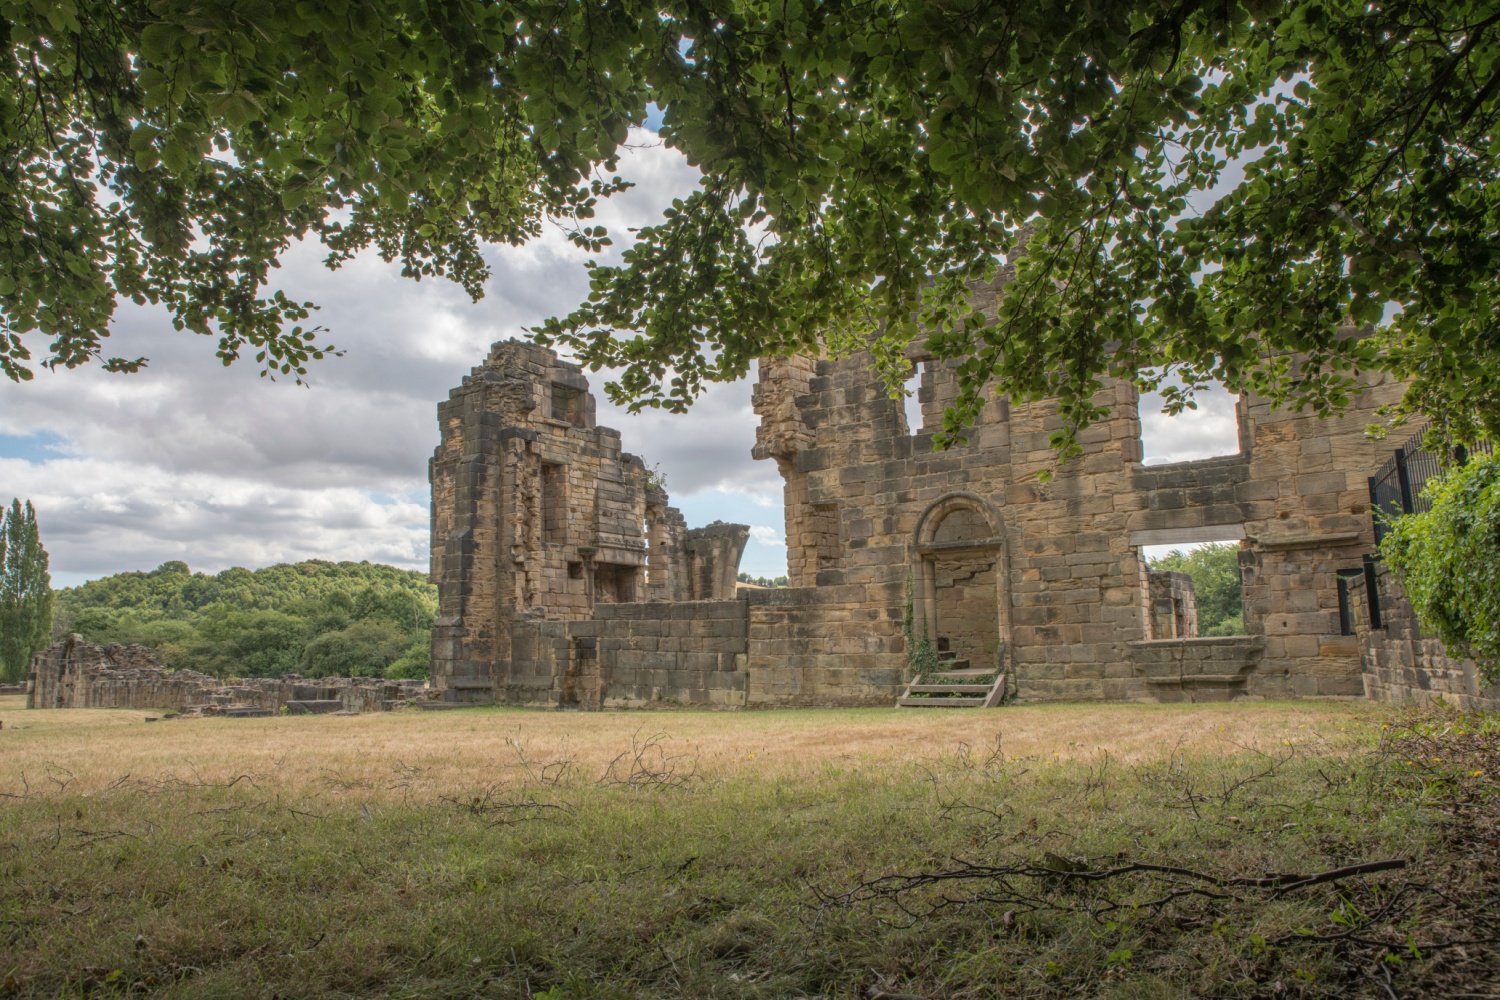 Image name monk bretton priory barnsley south yorkshire the 19 image from the post A look at the history of Monk Bretton Priory, Barnsley, with Dr Emma Wells in Yorkshire.com.